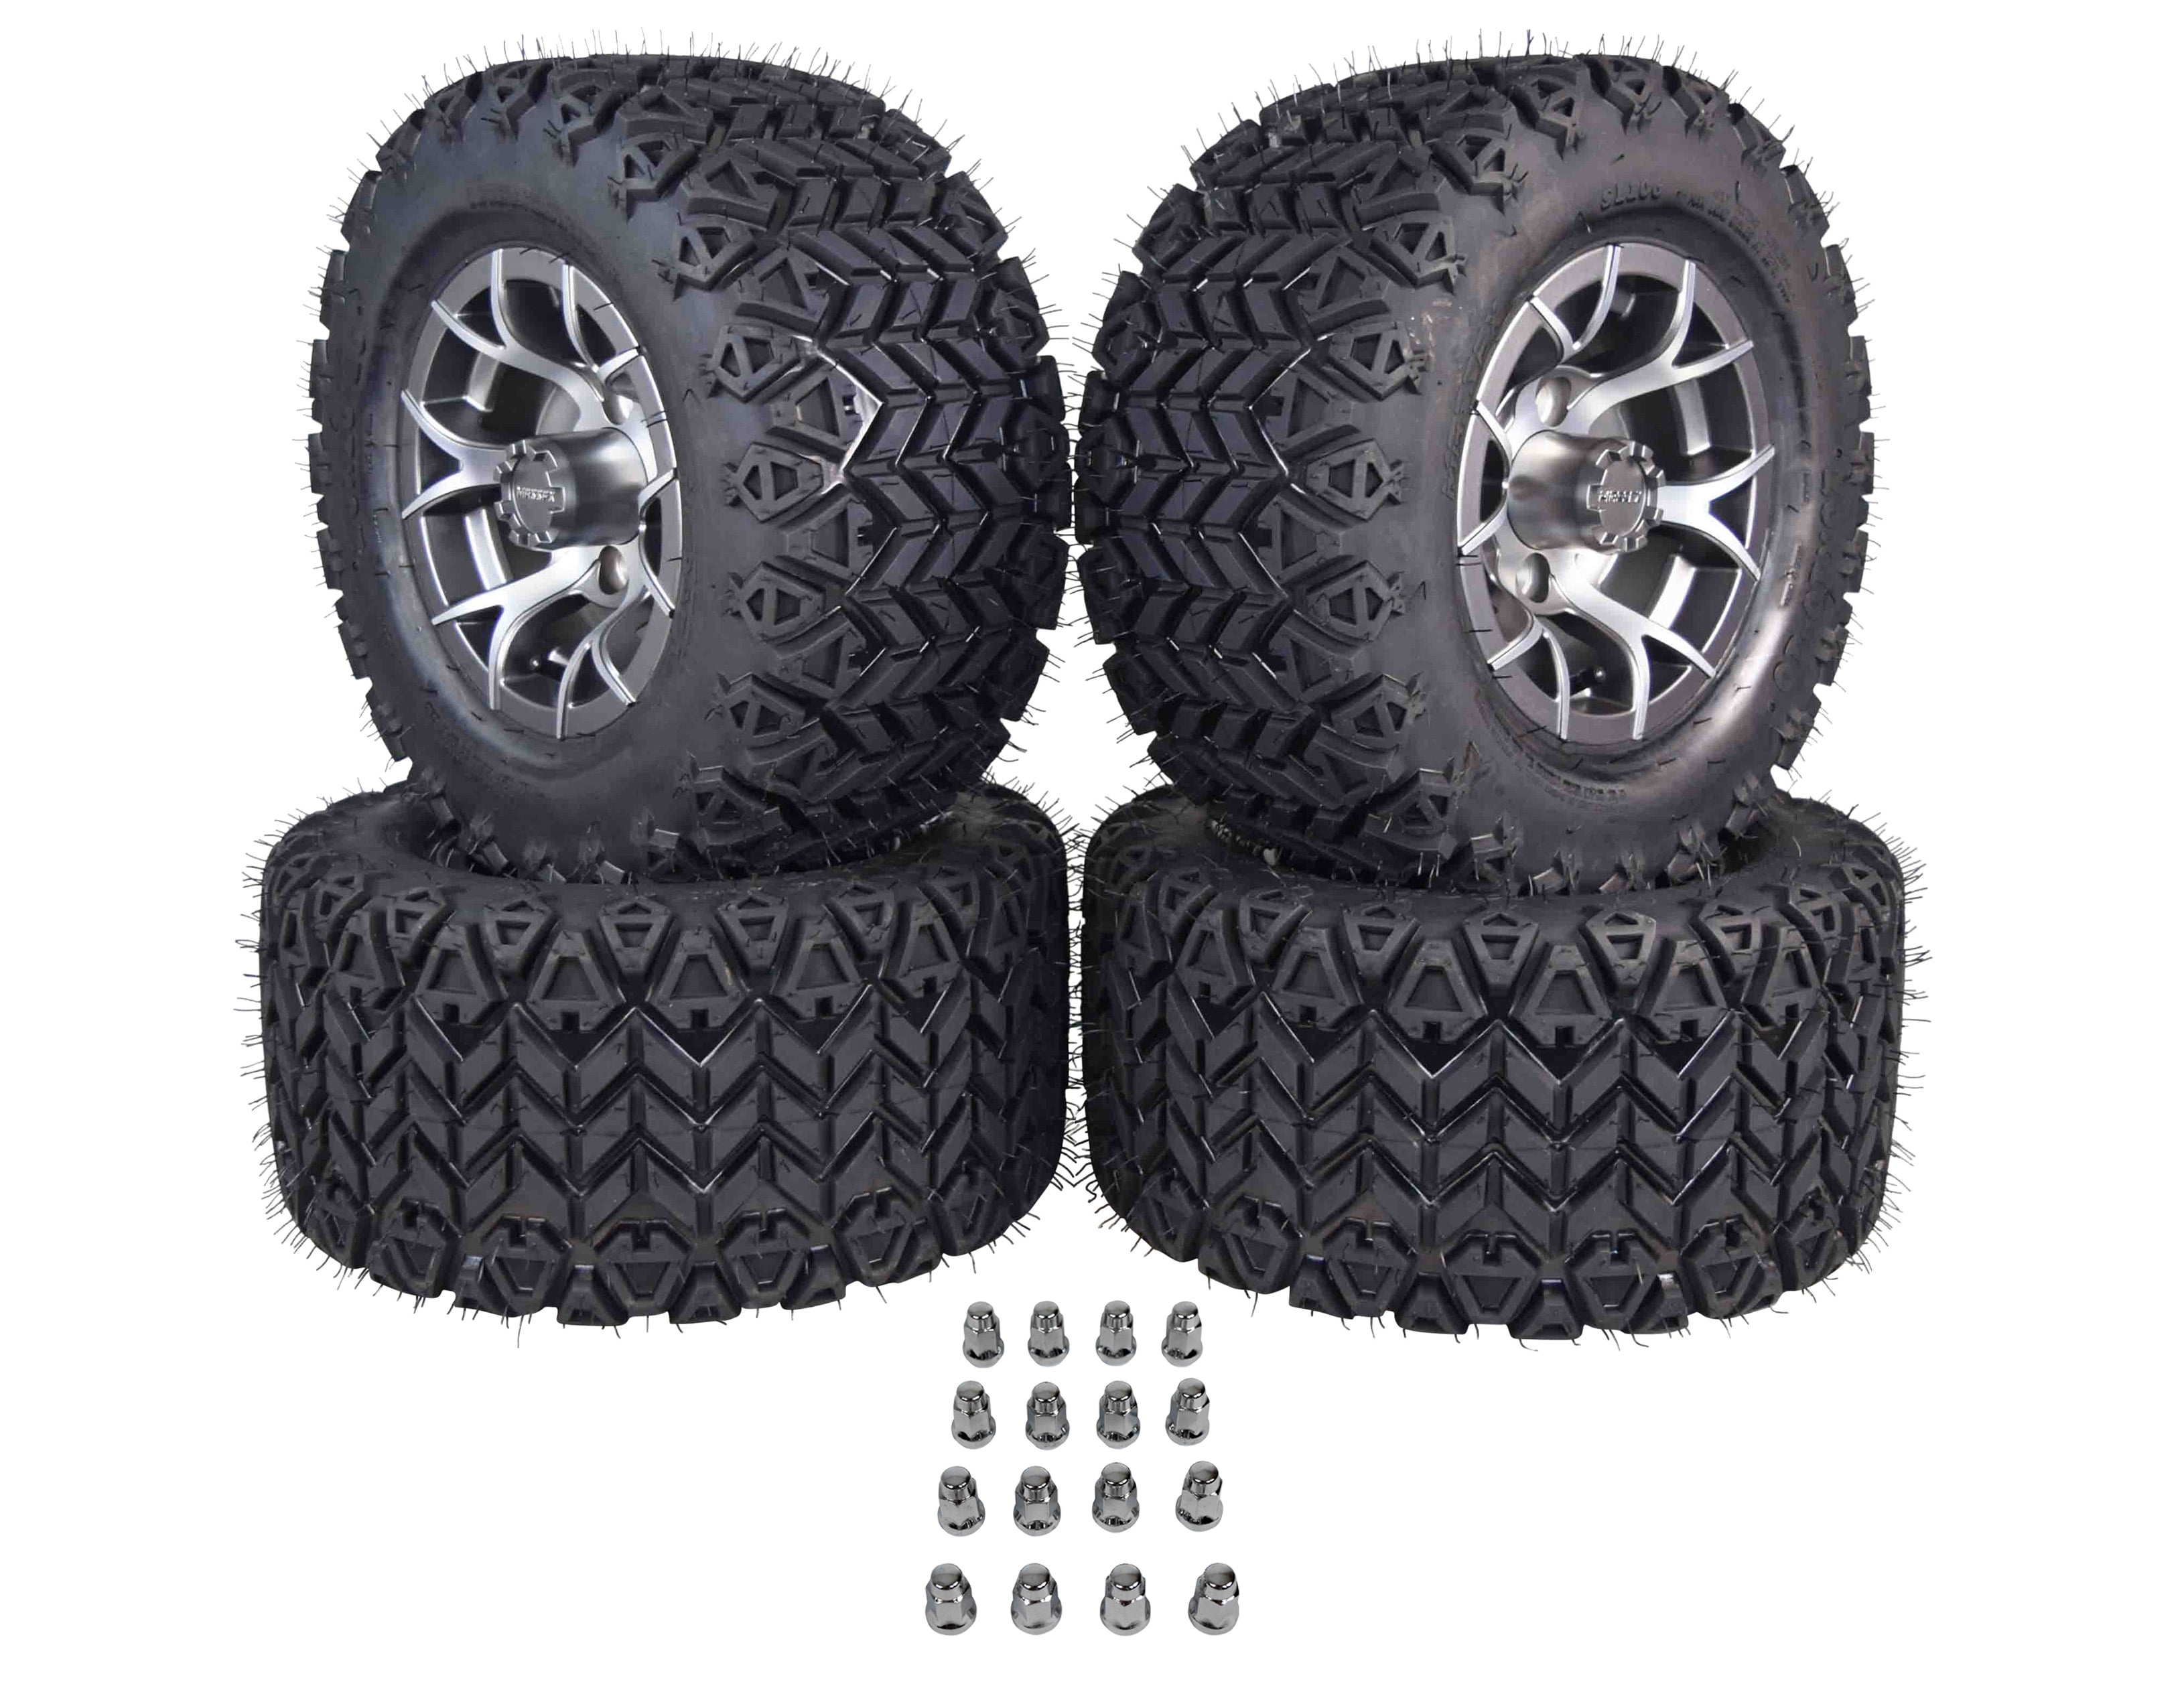 VEVOR Tires and Rims Go Kart 58 mm Bolt Pattern, Go Cart Wheels and Tires  10x 4.50 Front, 11x 6.0 Rear HUB- 3-hole Sets of 4 